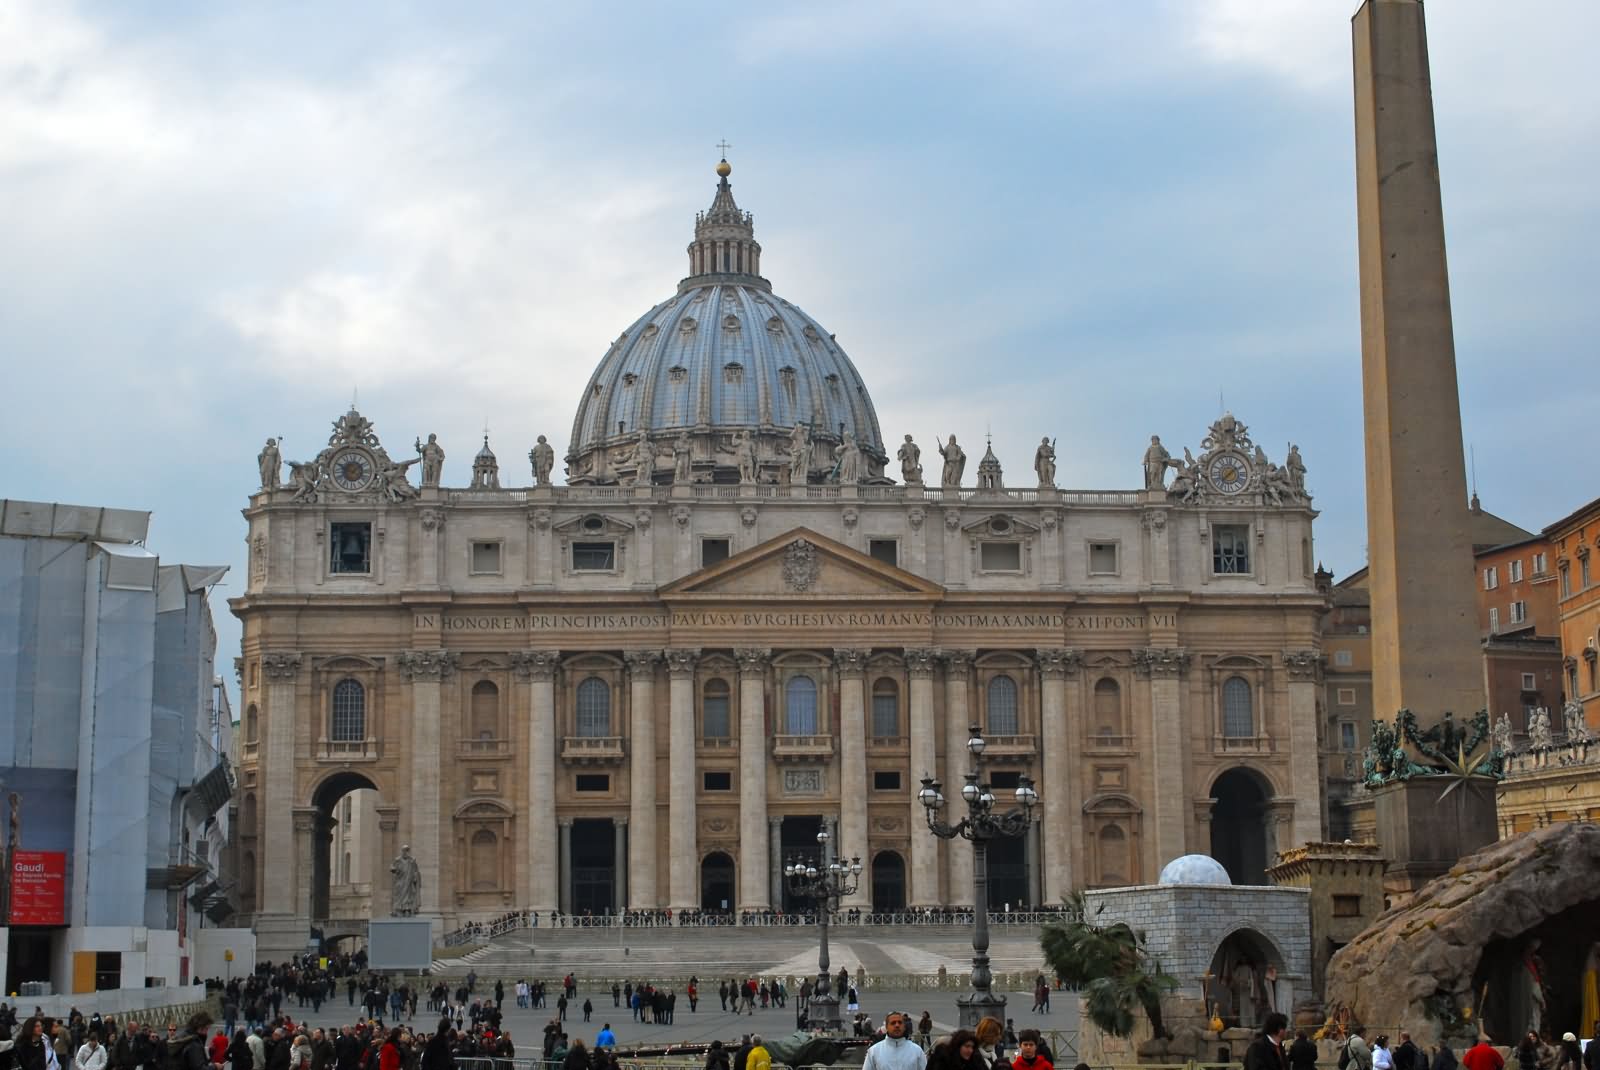 Outside View Of St. Peter's Basilica